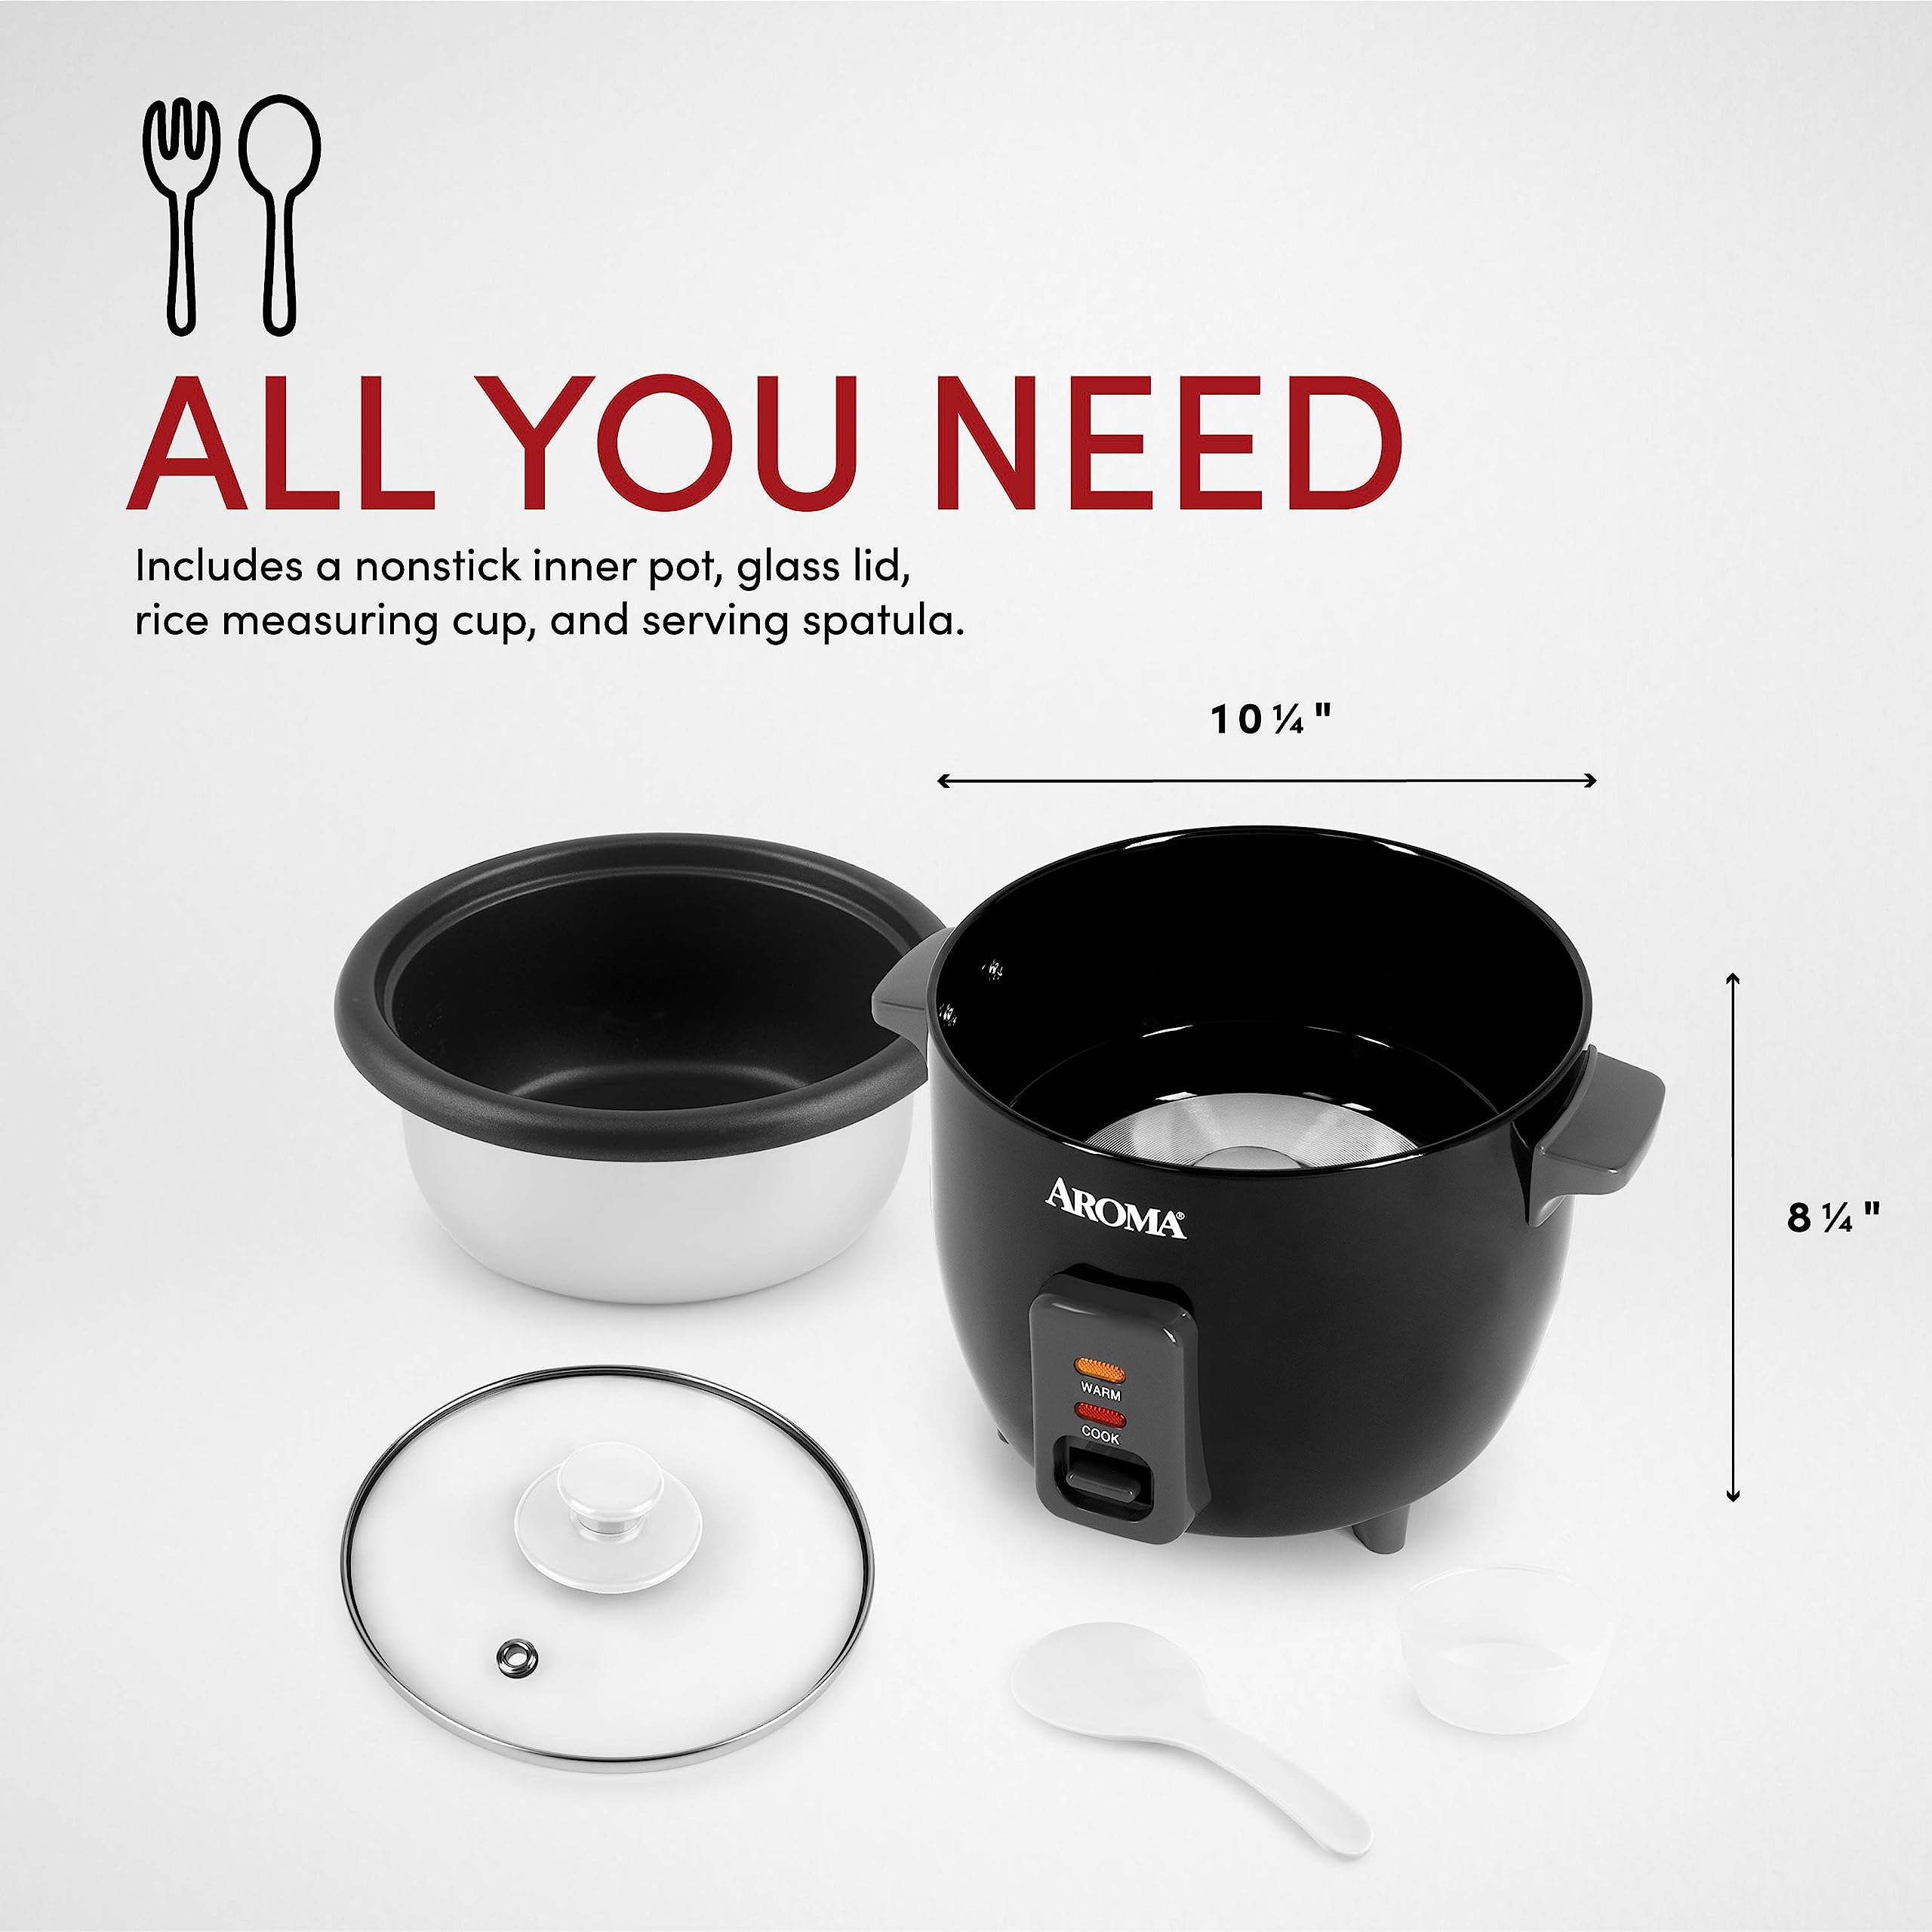 Aroma Housewares 6-Cup (Cooked) / 1.5Qt. Rice & Grain Cooker (ARC-363NGB),Black,6-Cup Cooked / 3-Cup Uncooked